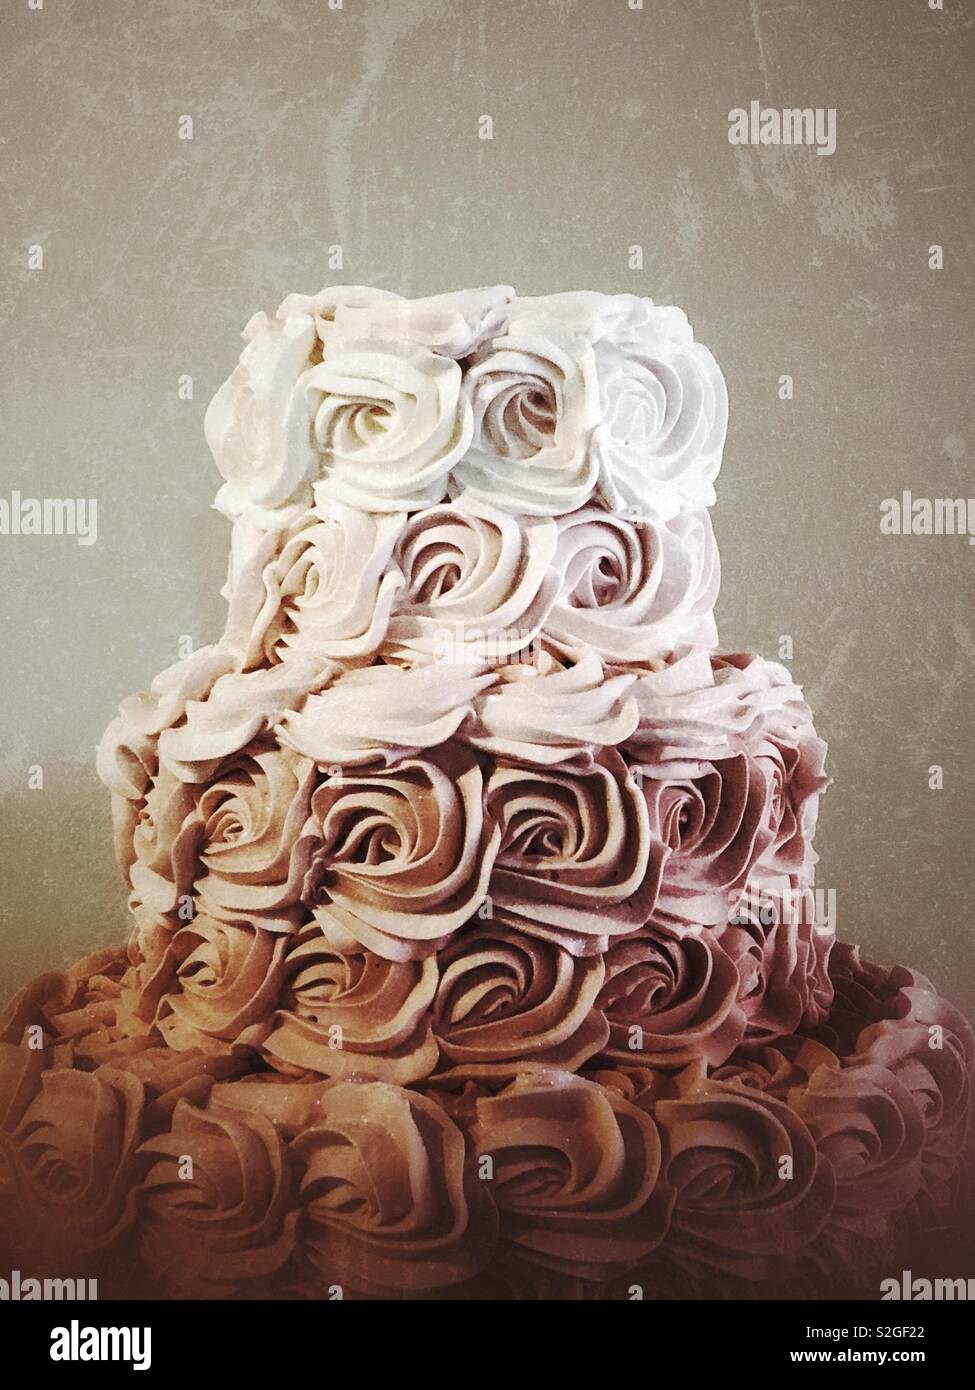 Cake covered with cream rosettes Stock Photo